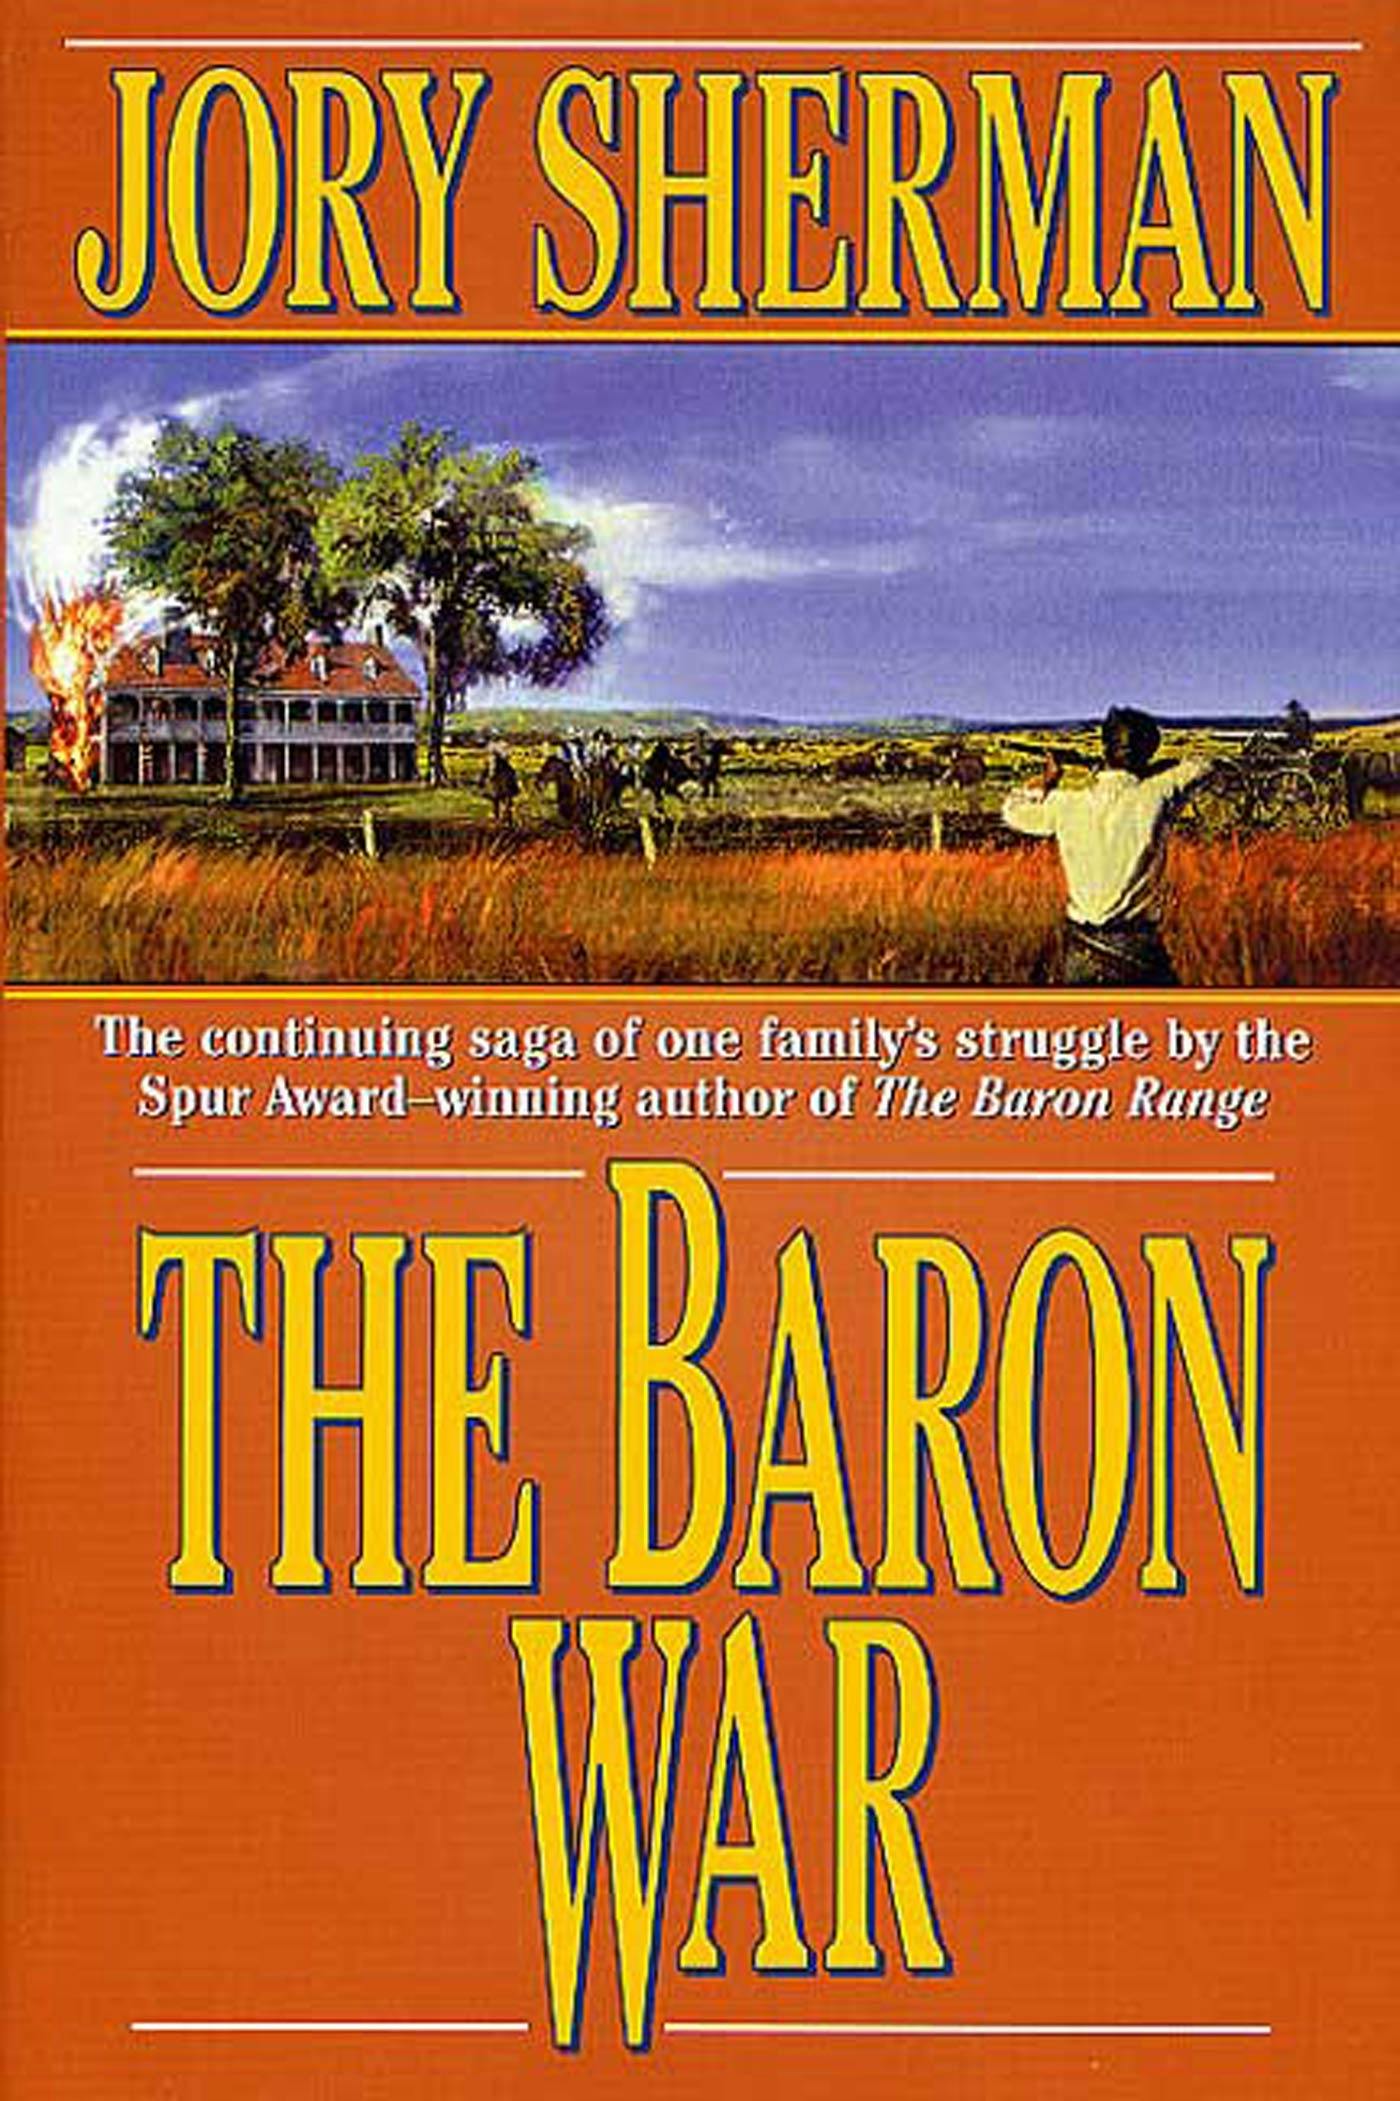 Cover for the book titled as: The Baron War